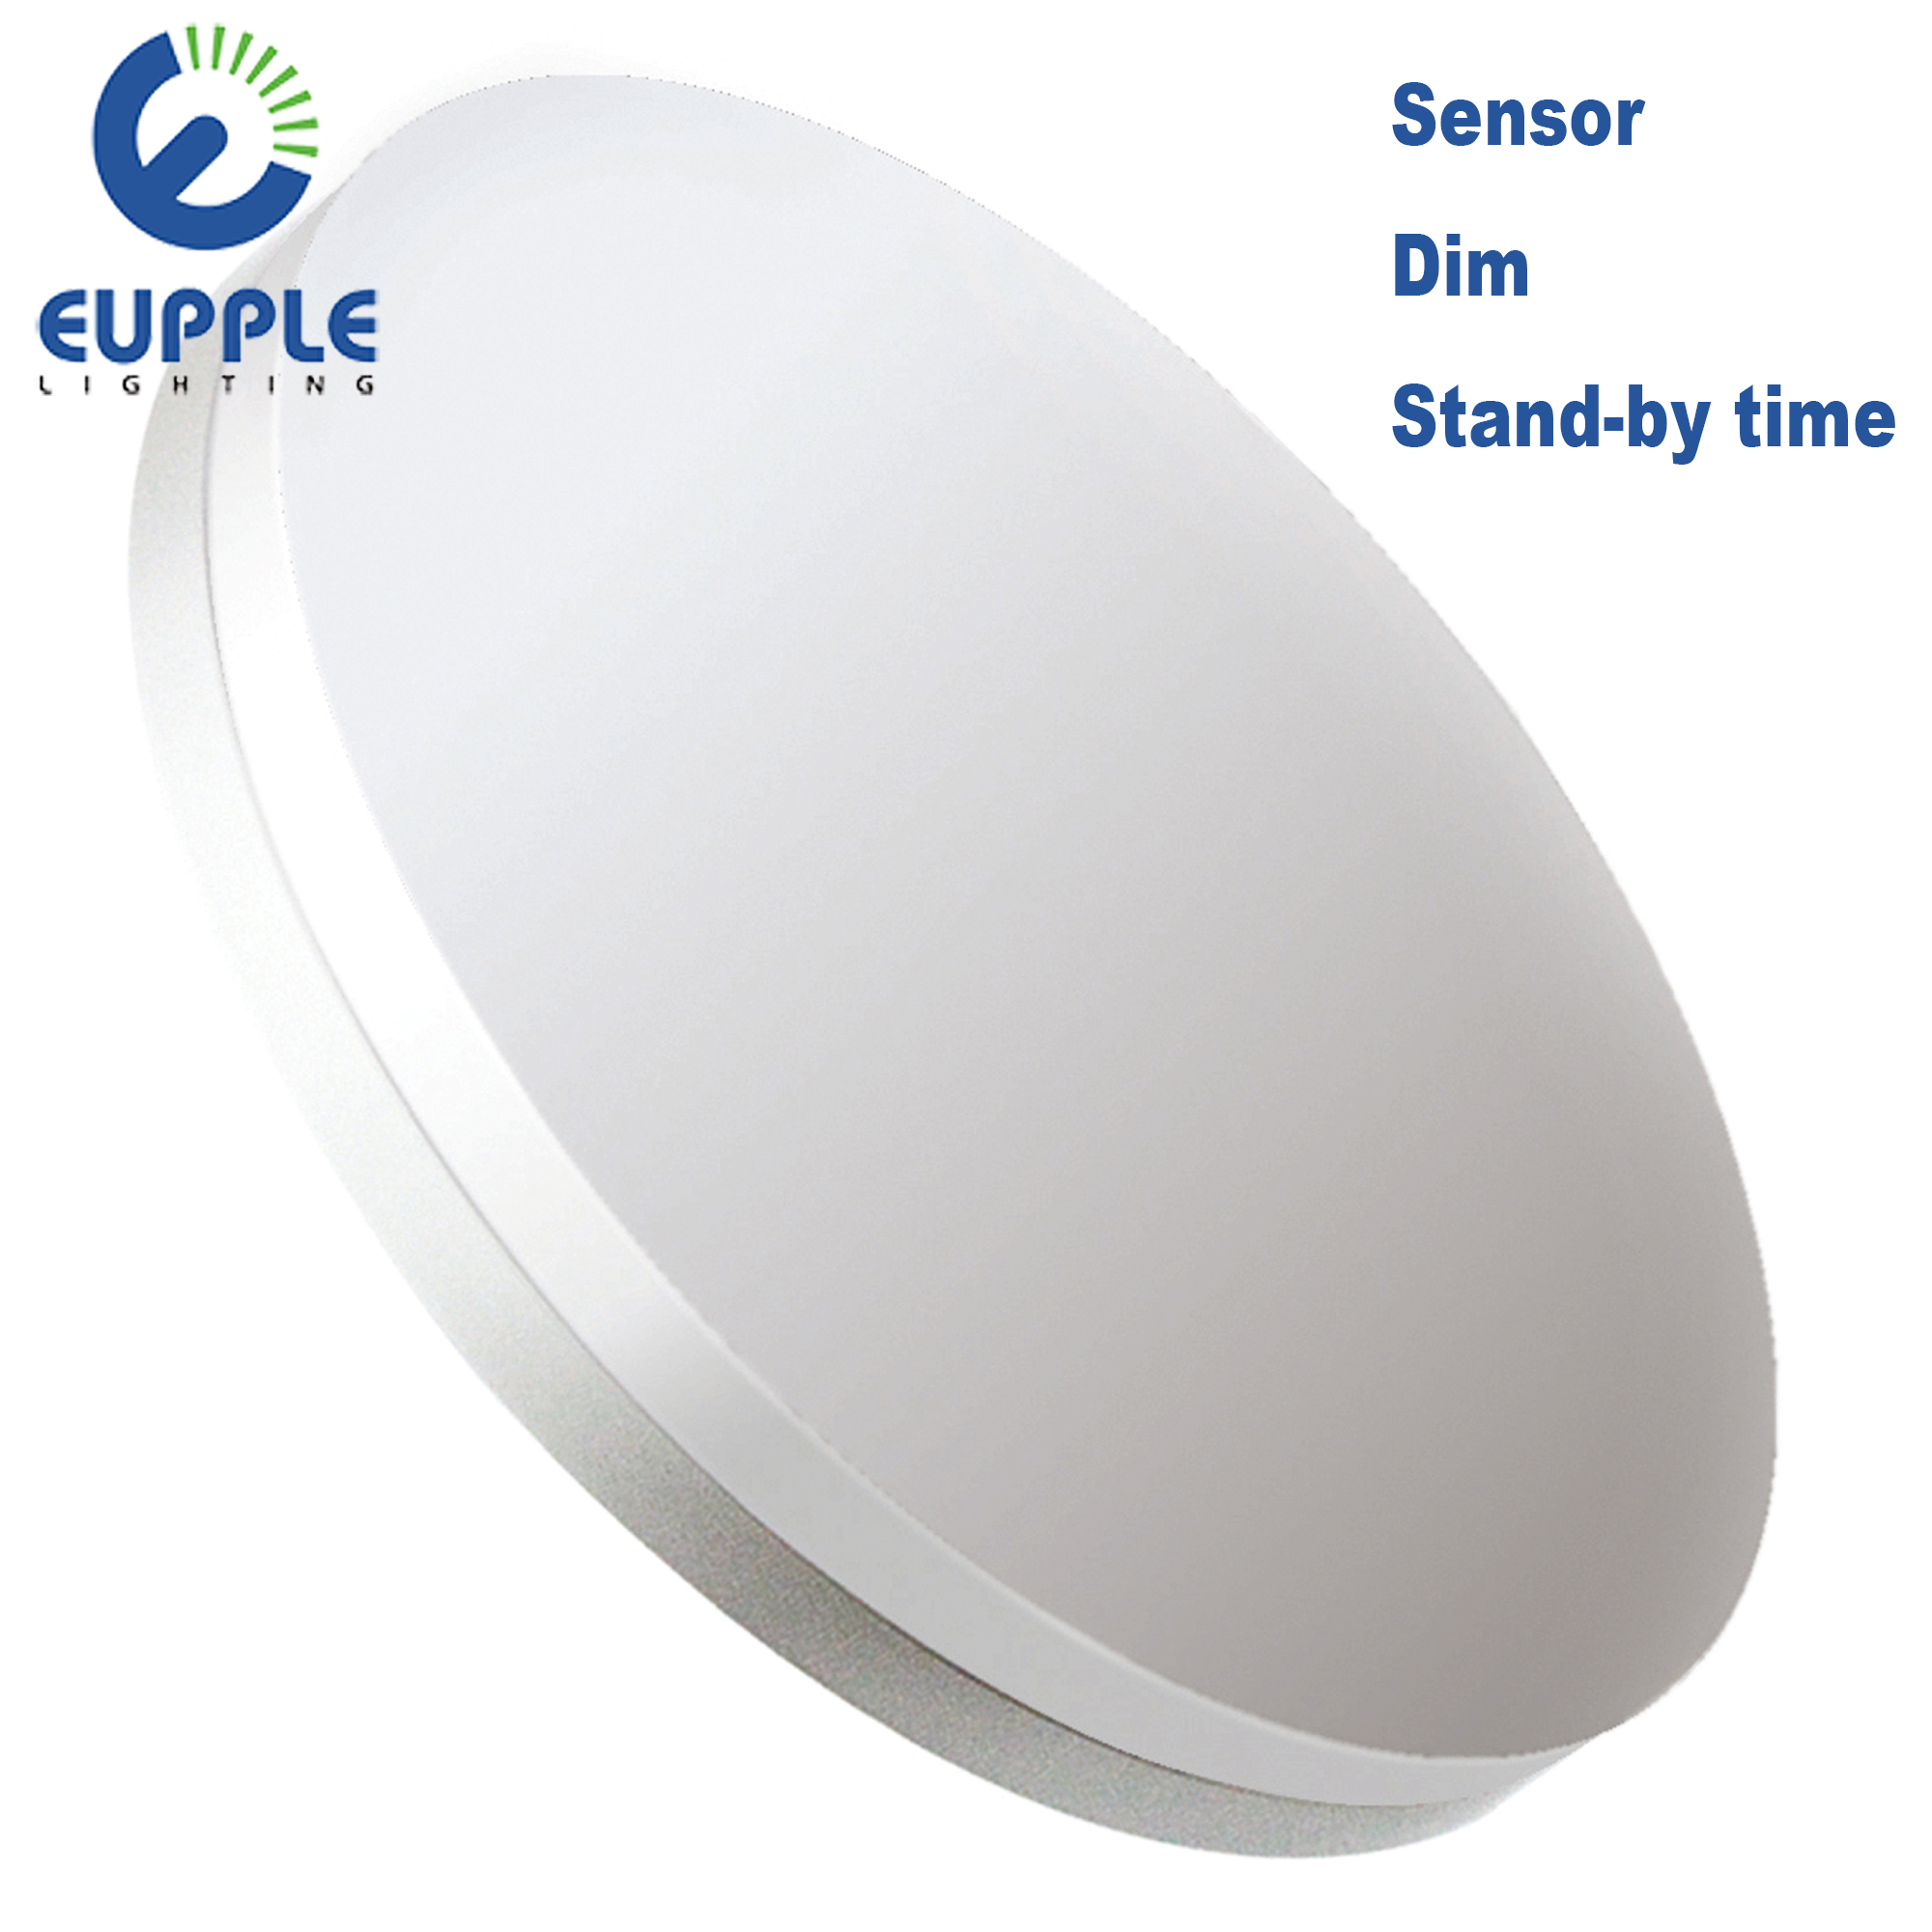  SAA TUV CE CB China supplier Automatic Dimmable Hold-time Microwave Motion Sensor SLIM LED Ceiling Lighting 24w 16w